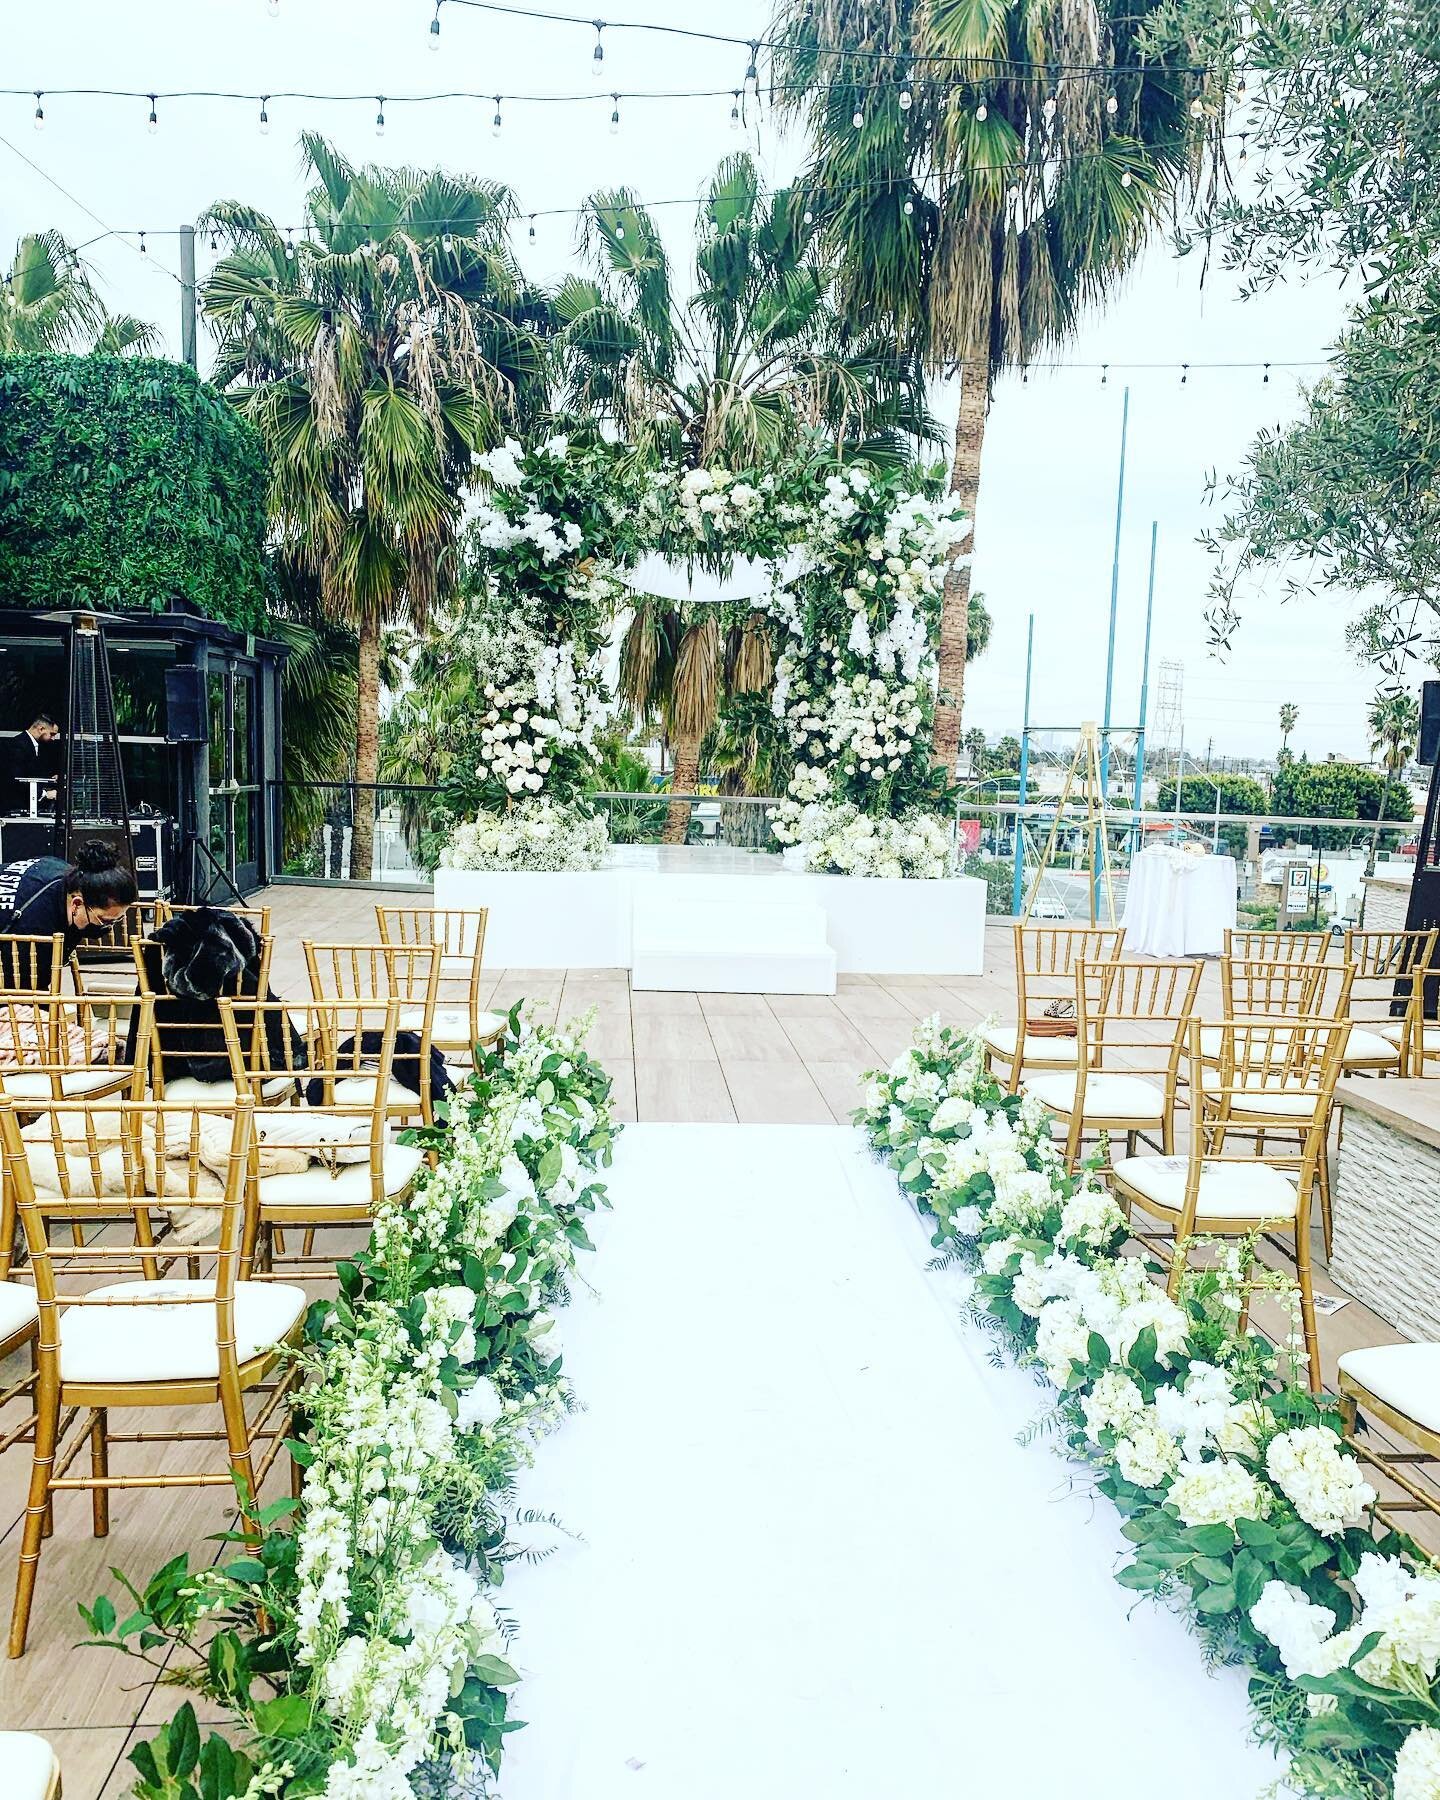 To die for Chuppah design - the religious wedding celebrating Isaac &amp; @rachelleyadegar ... congrats you guys!! Magical florals by @larklosangeles // rentals @imperialpartyrentalsla // planner @eventswithcathy at Culver City&rsquo;s chic new rooft